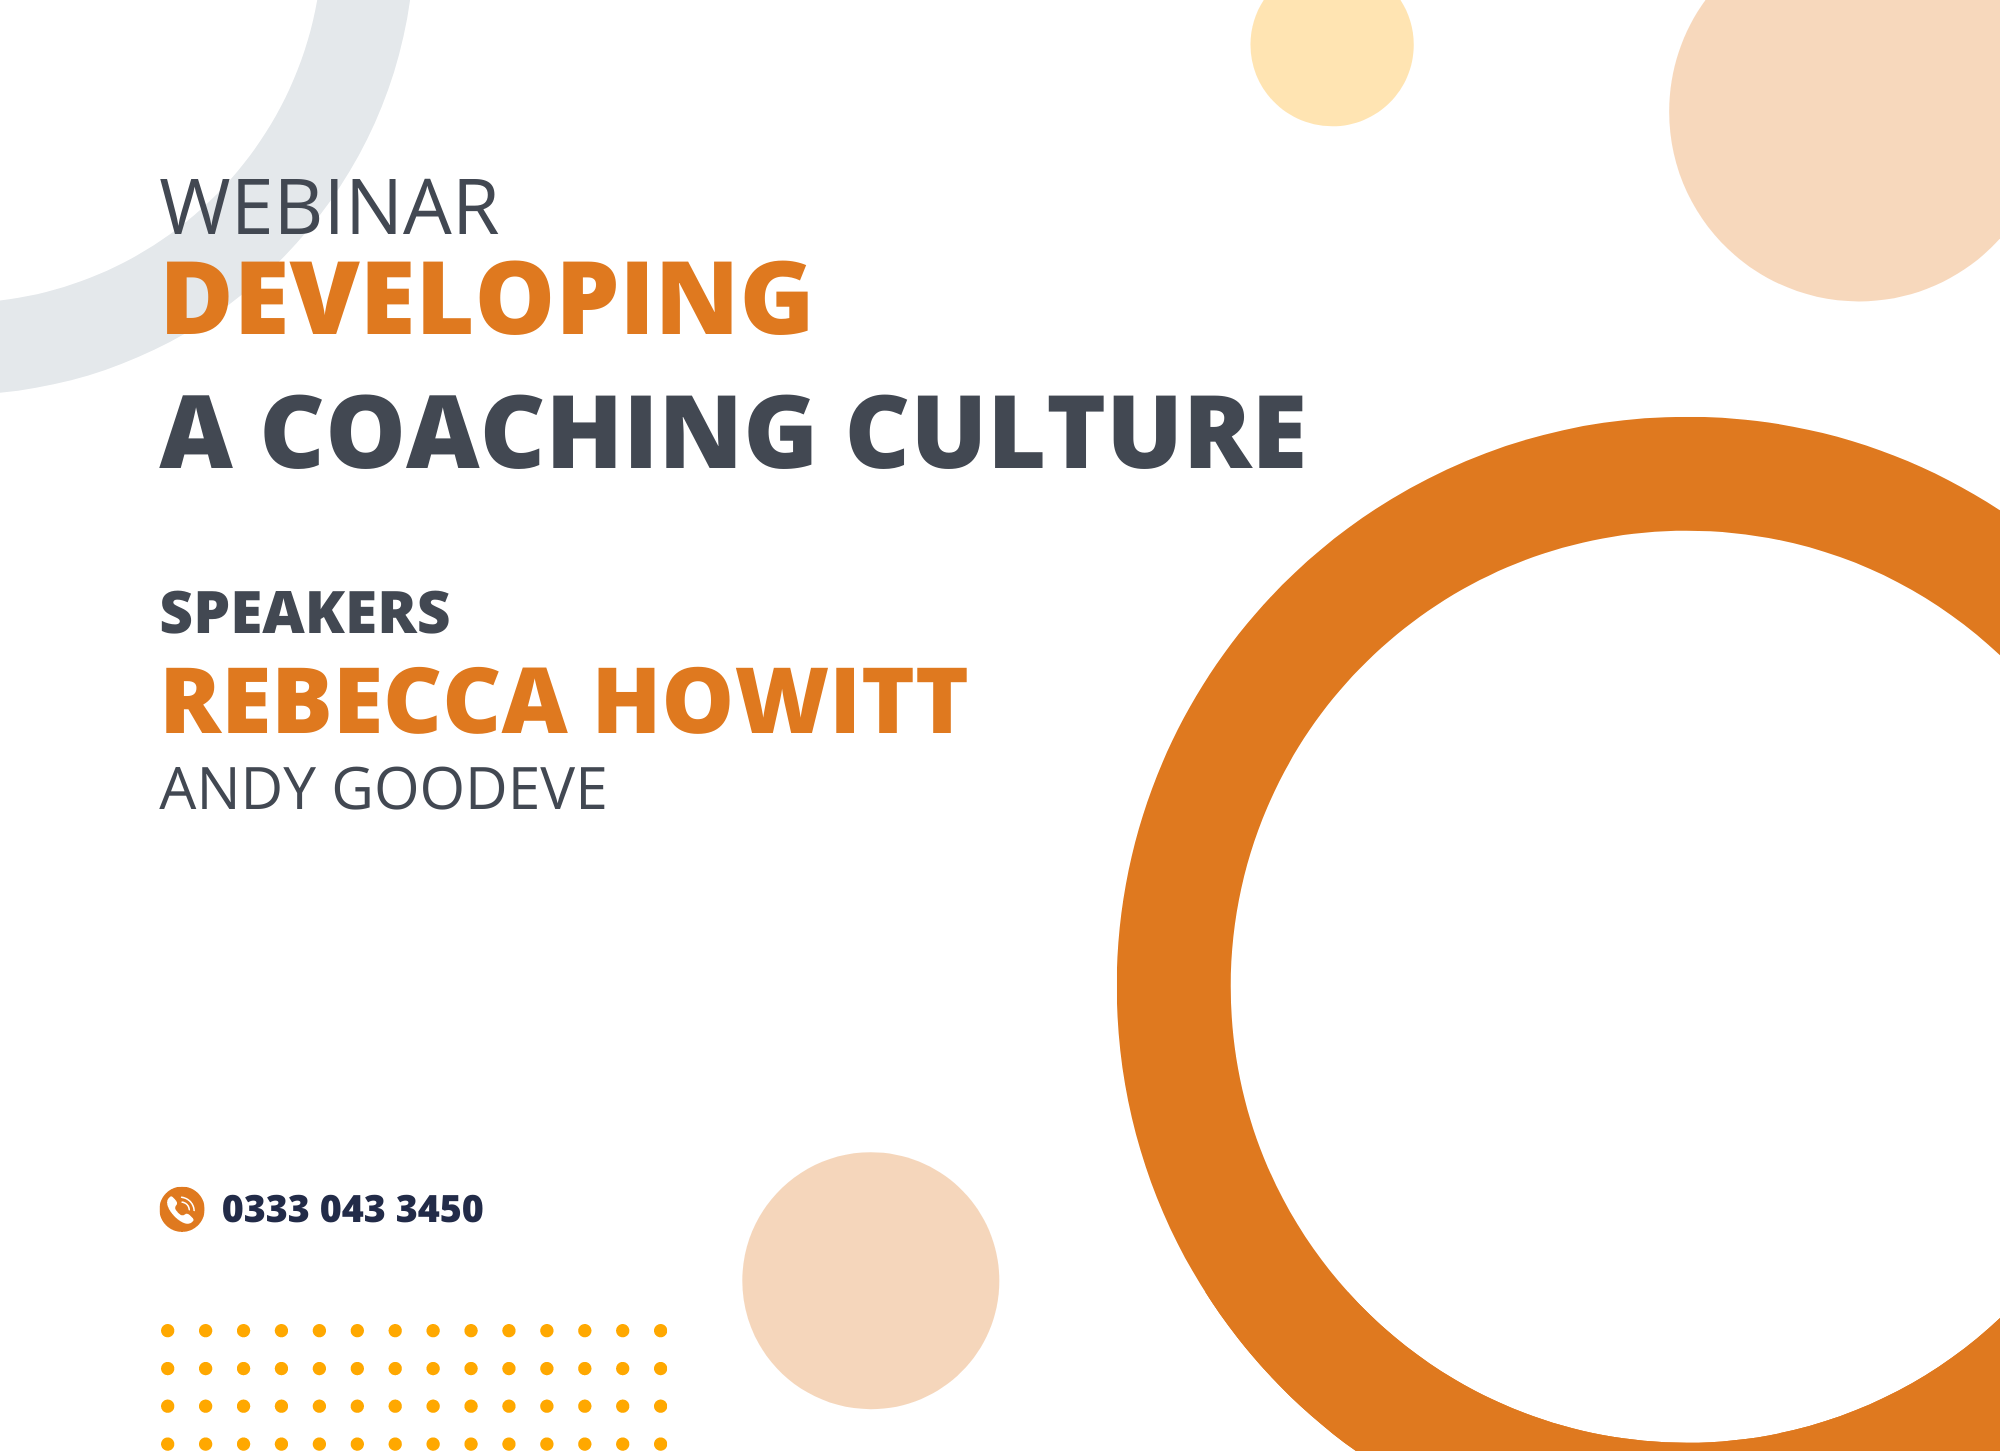 Developing a coaching culture and using interim reviews